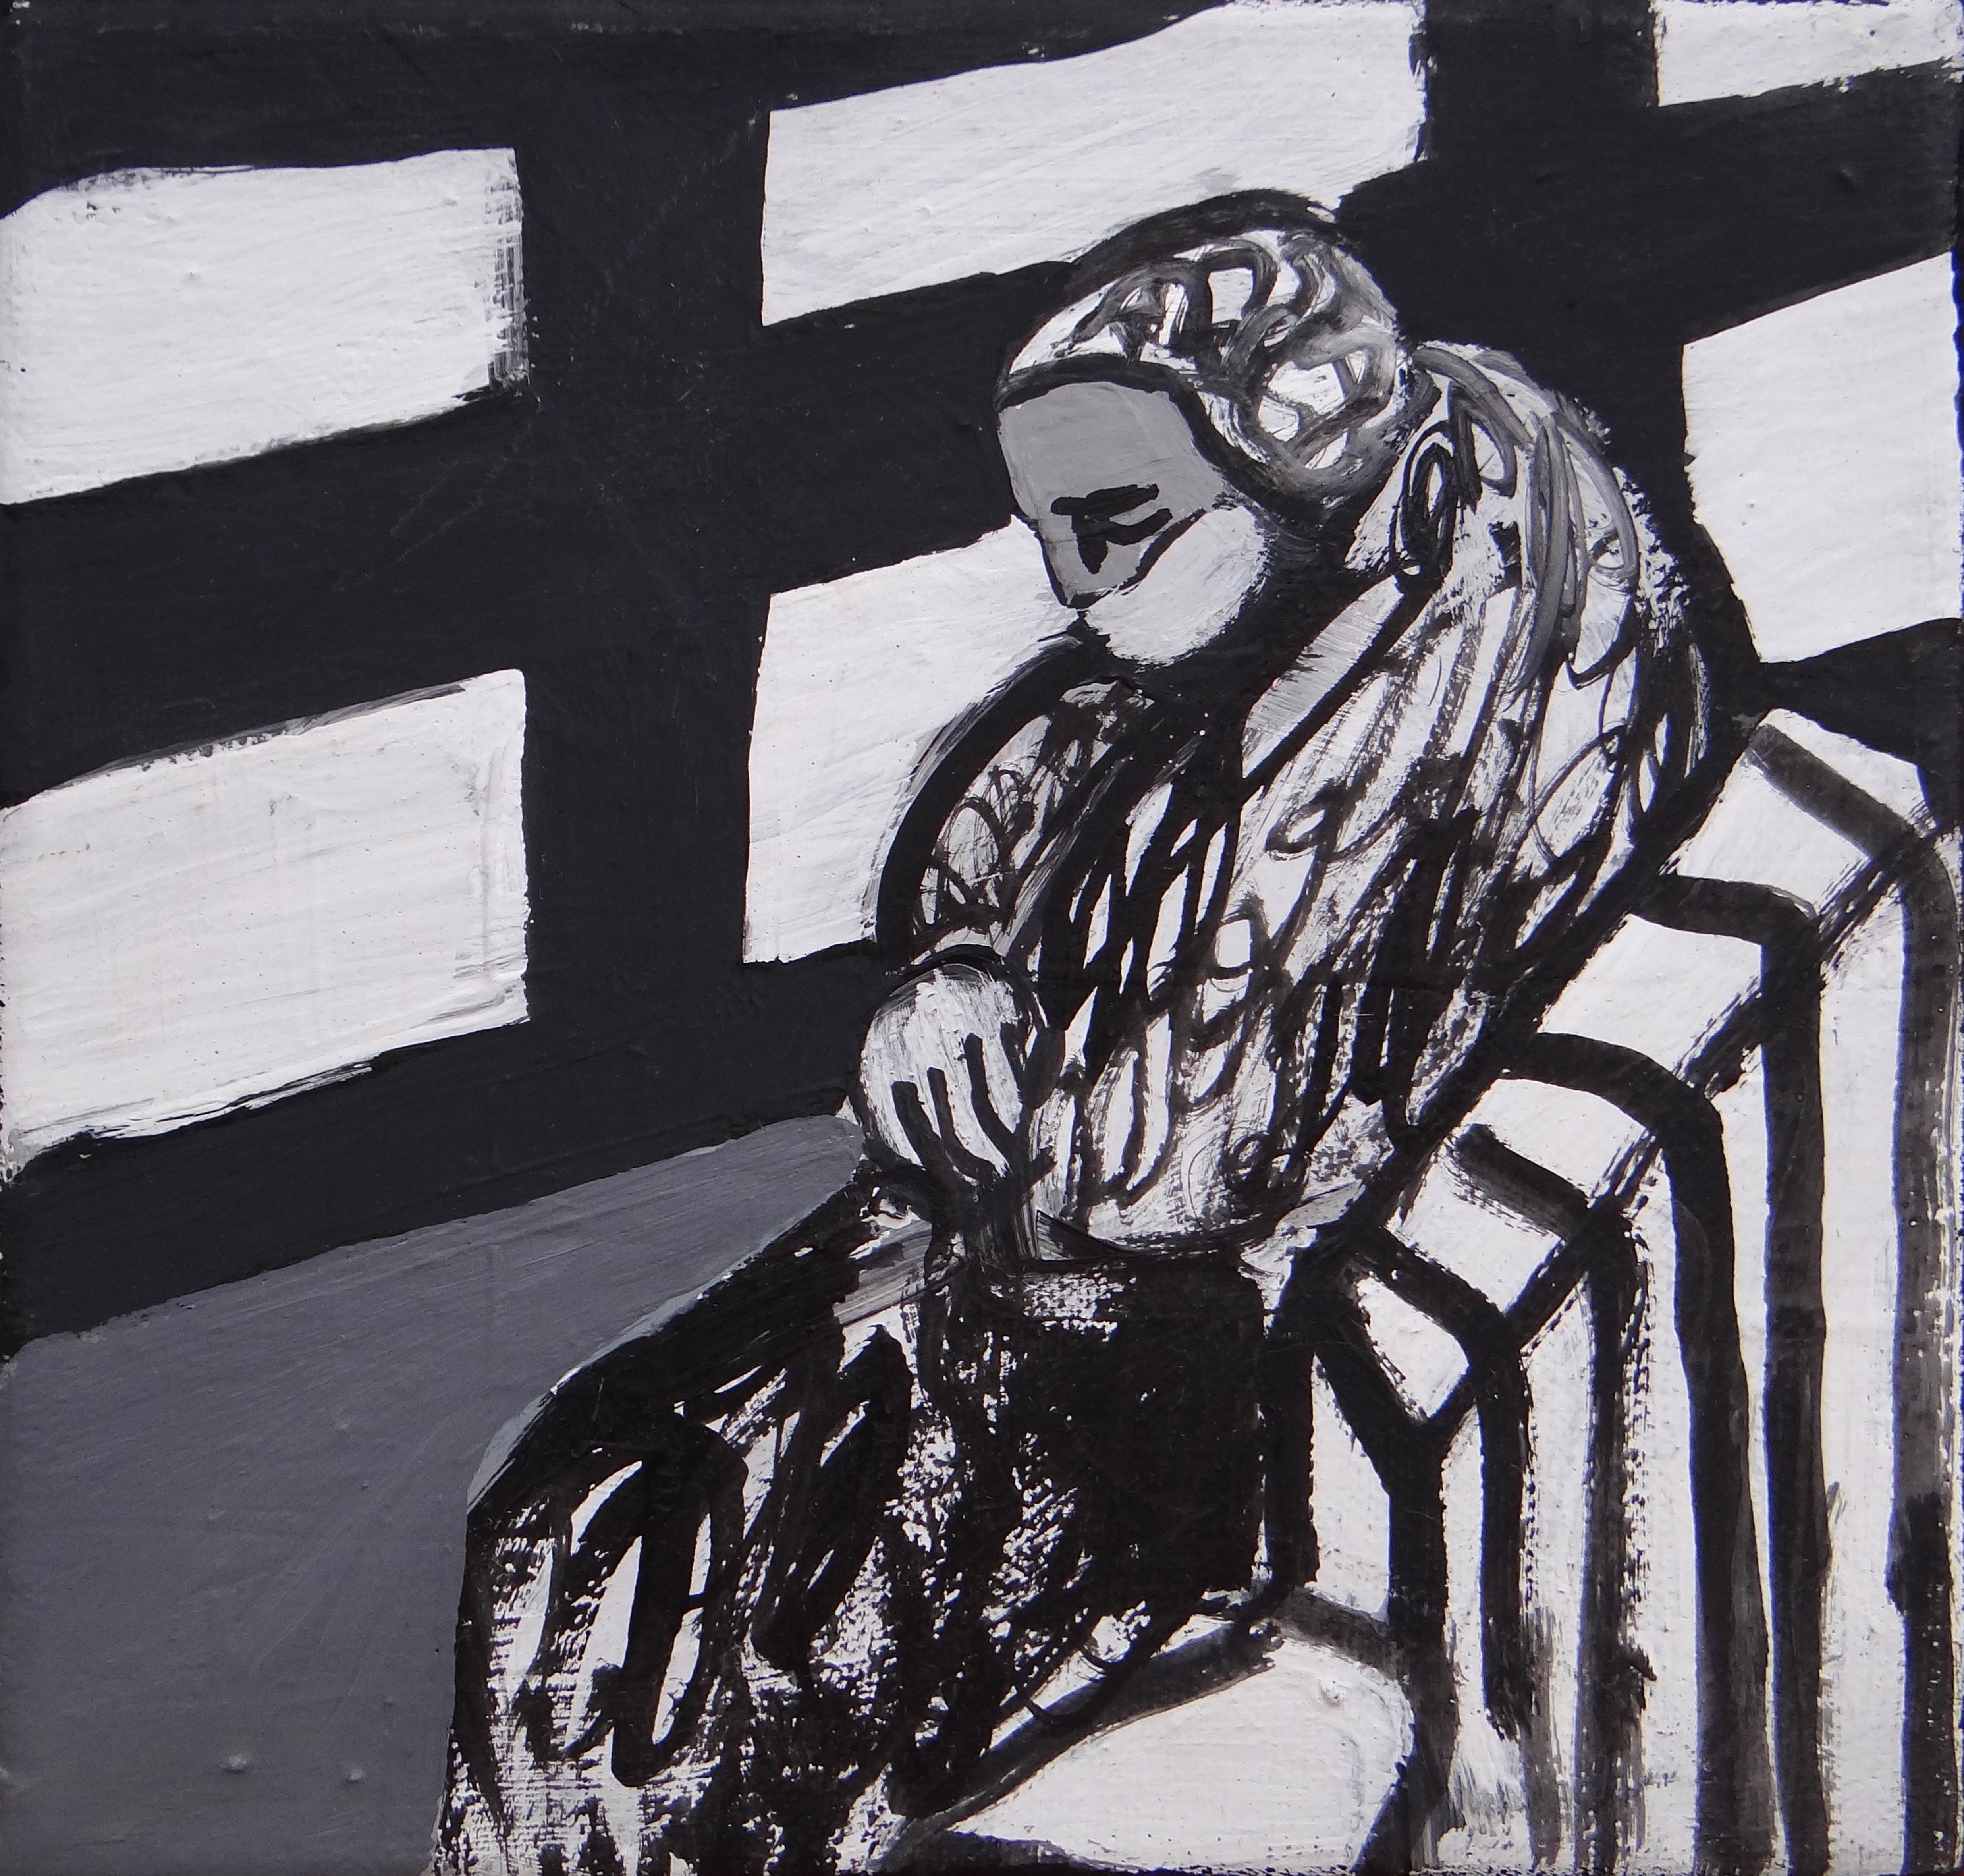 Waiting Room 2 - Contemporary Expressive, Symbolic Black-White Painting